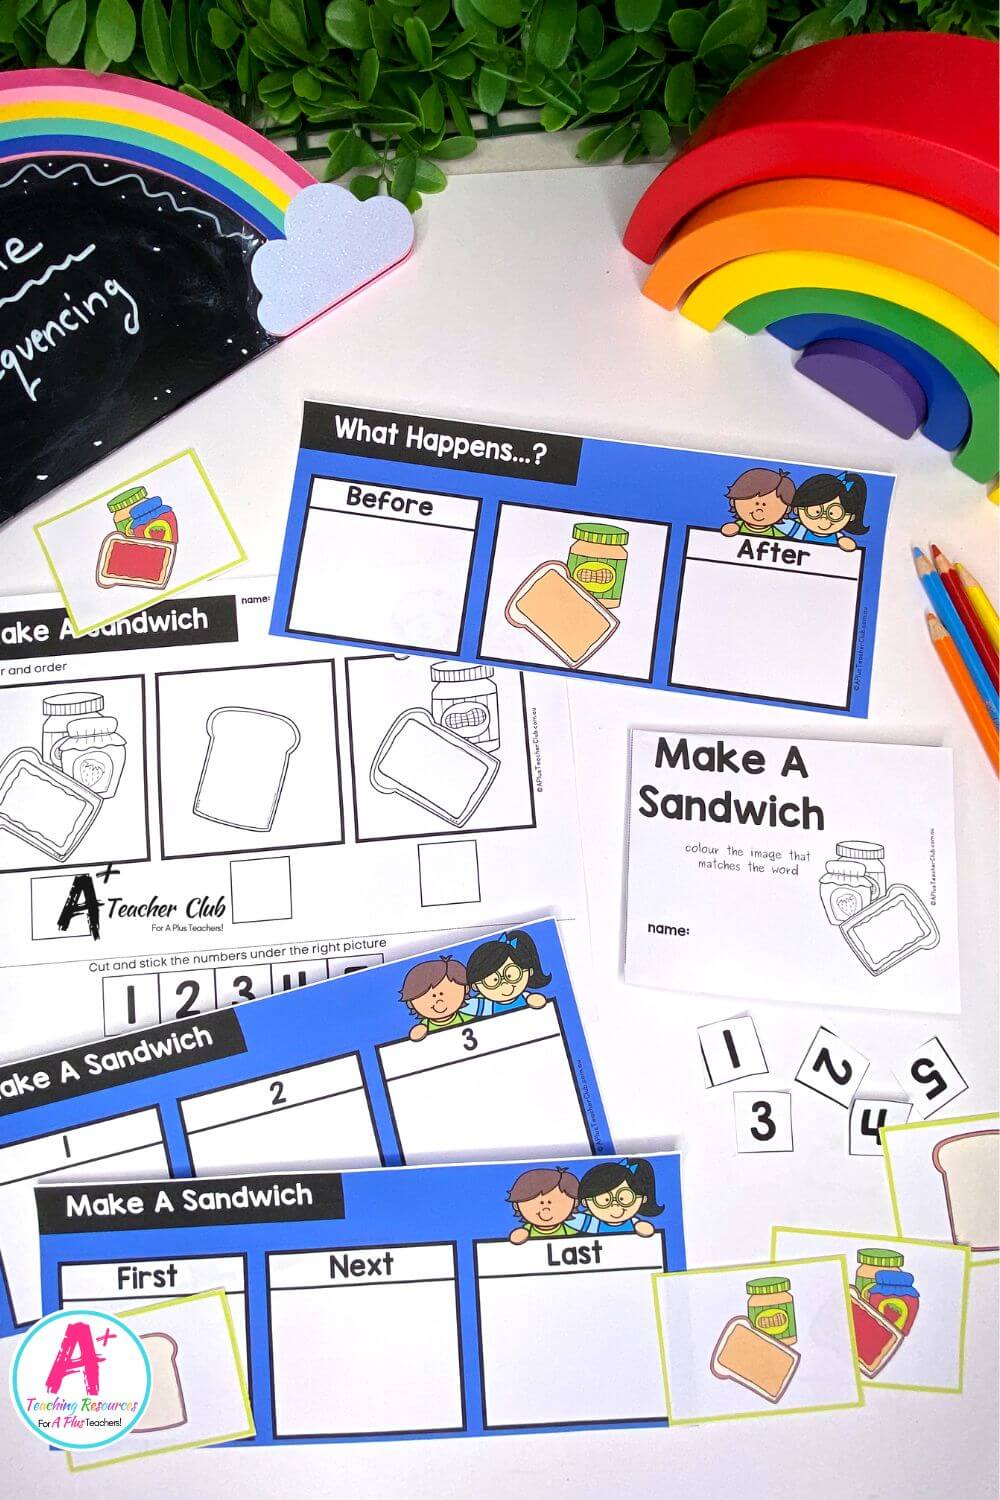 3-Step Sequencing Everyday Events - Make A Sandwich Activities Pack